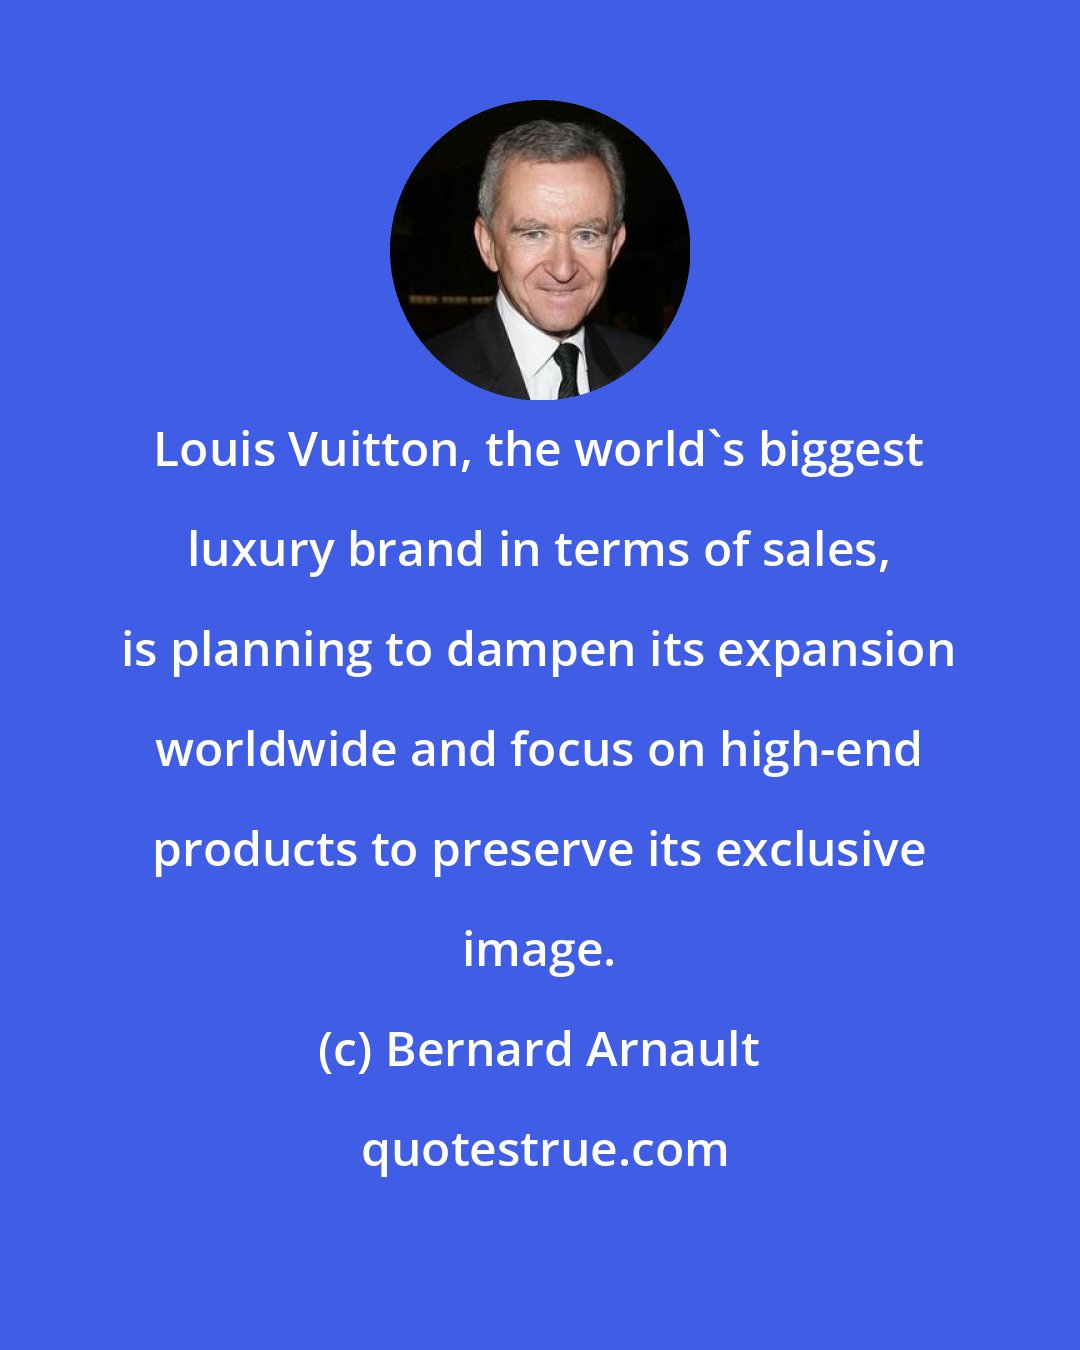 Bernard Arnault: Louis Vuitton, the world's biggest luxury brand in terms of sales, is planning to dampen its expansion worldwide and focus on high-end products to preserve its exclusive image.